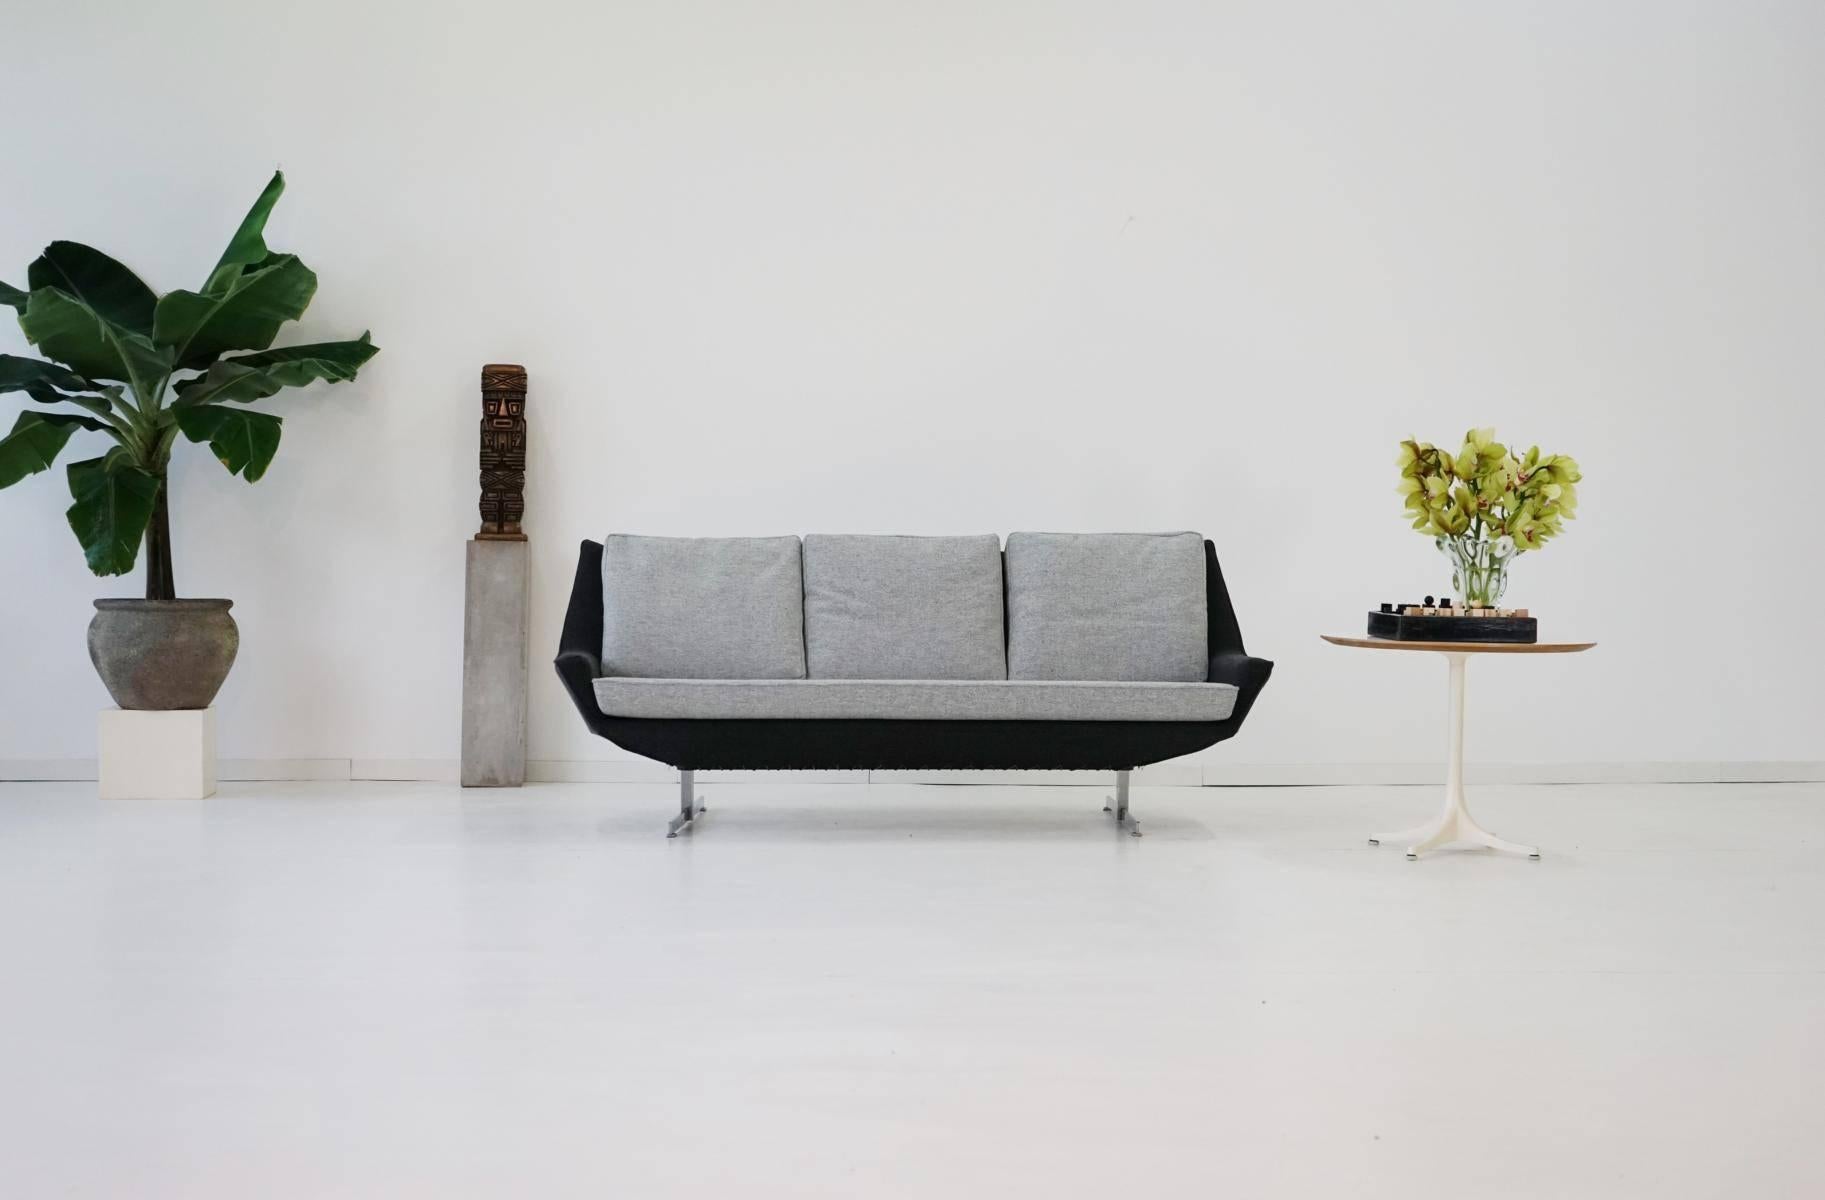 1950s Three-Seat Sofa by Knoll Midcentury Hallingdal Canapé Couch (Moderne der Mitte des Jahrhunderts)